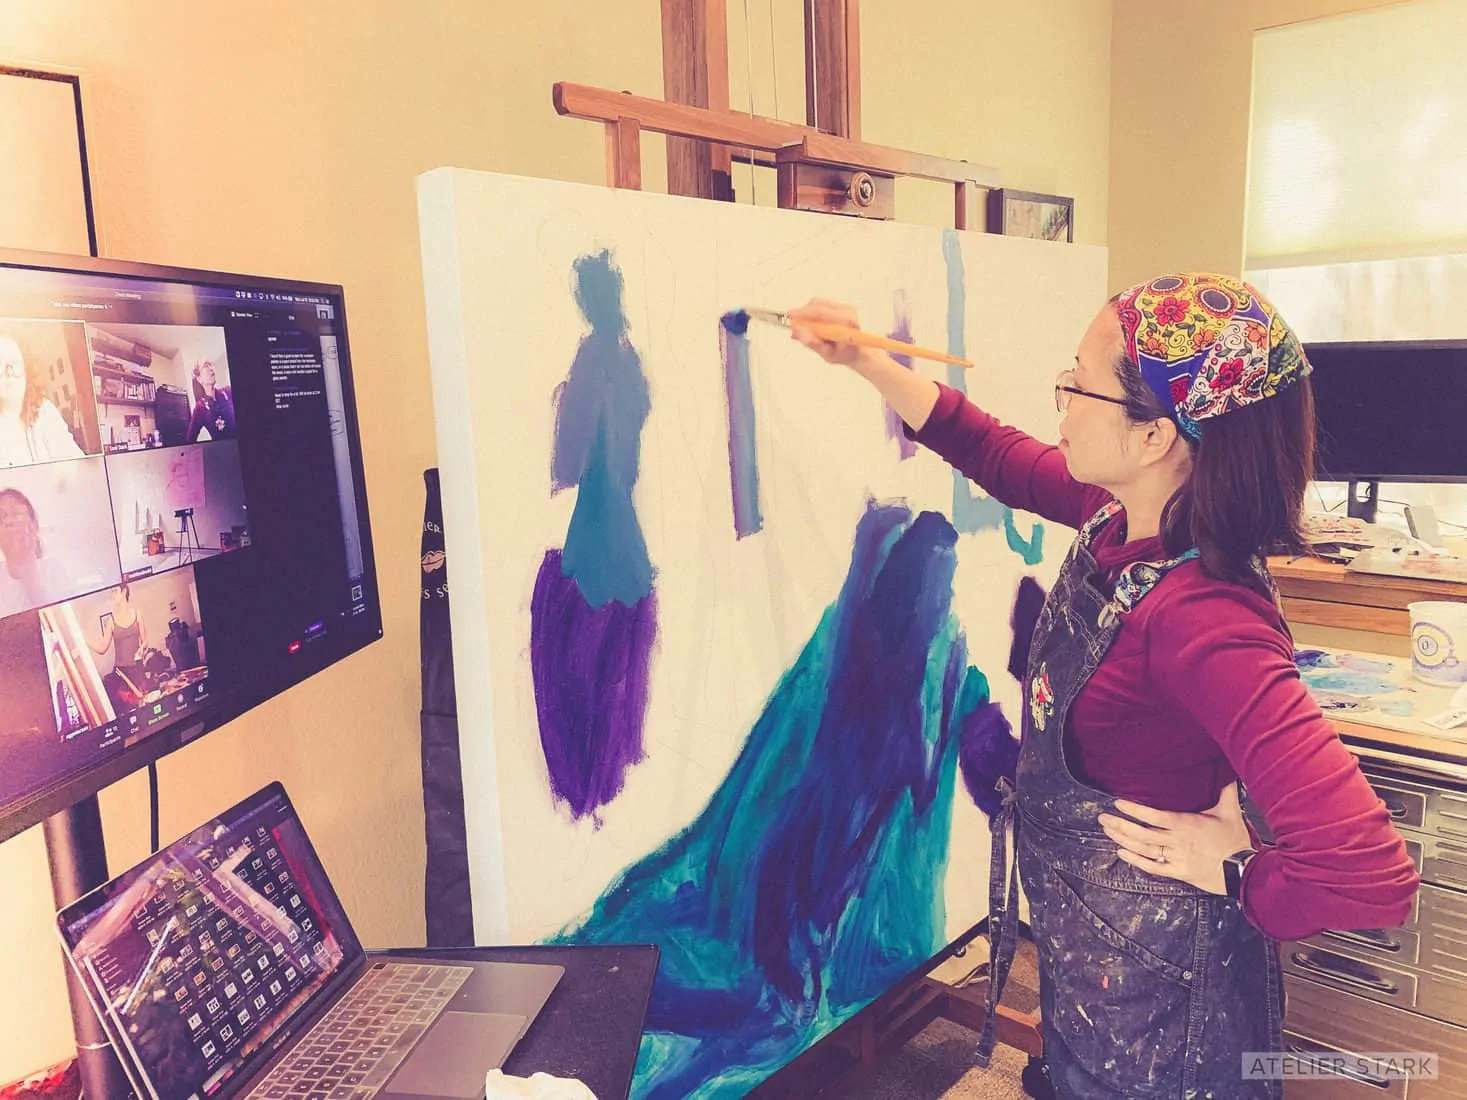 AGES 5-8: AFTER SCHOOL ONLINE WEEKLY ART CLASS: CREATIVE PAINTING, DRAWING,  & SELF-EXPRESSION - The Art Studio NY